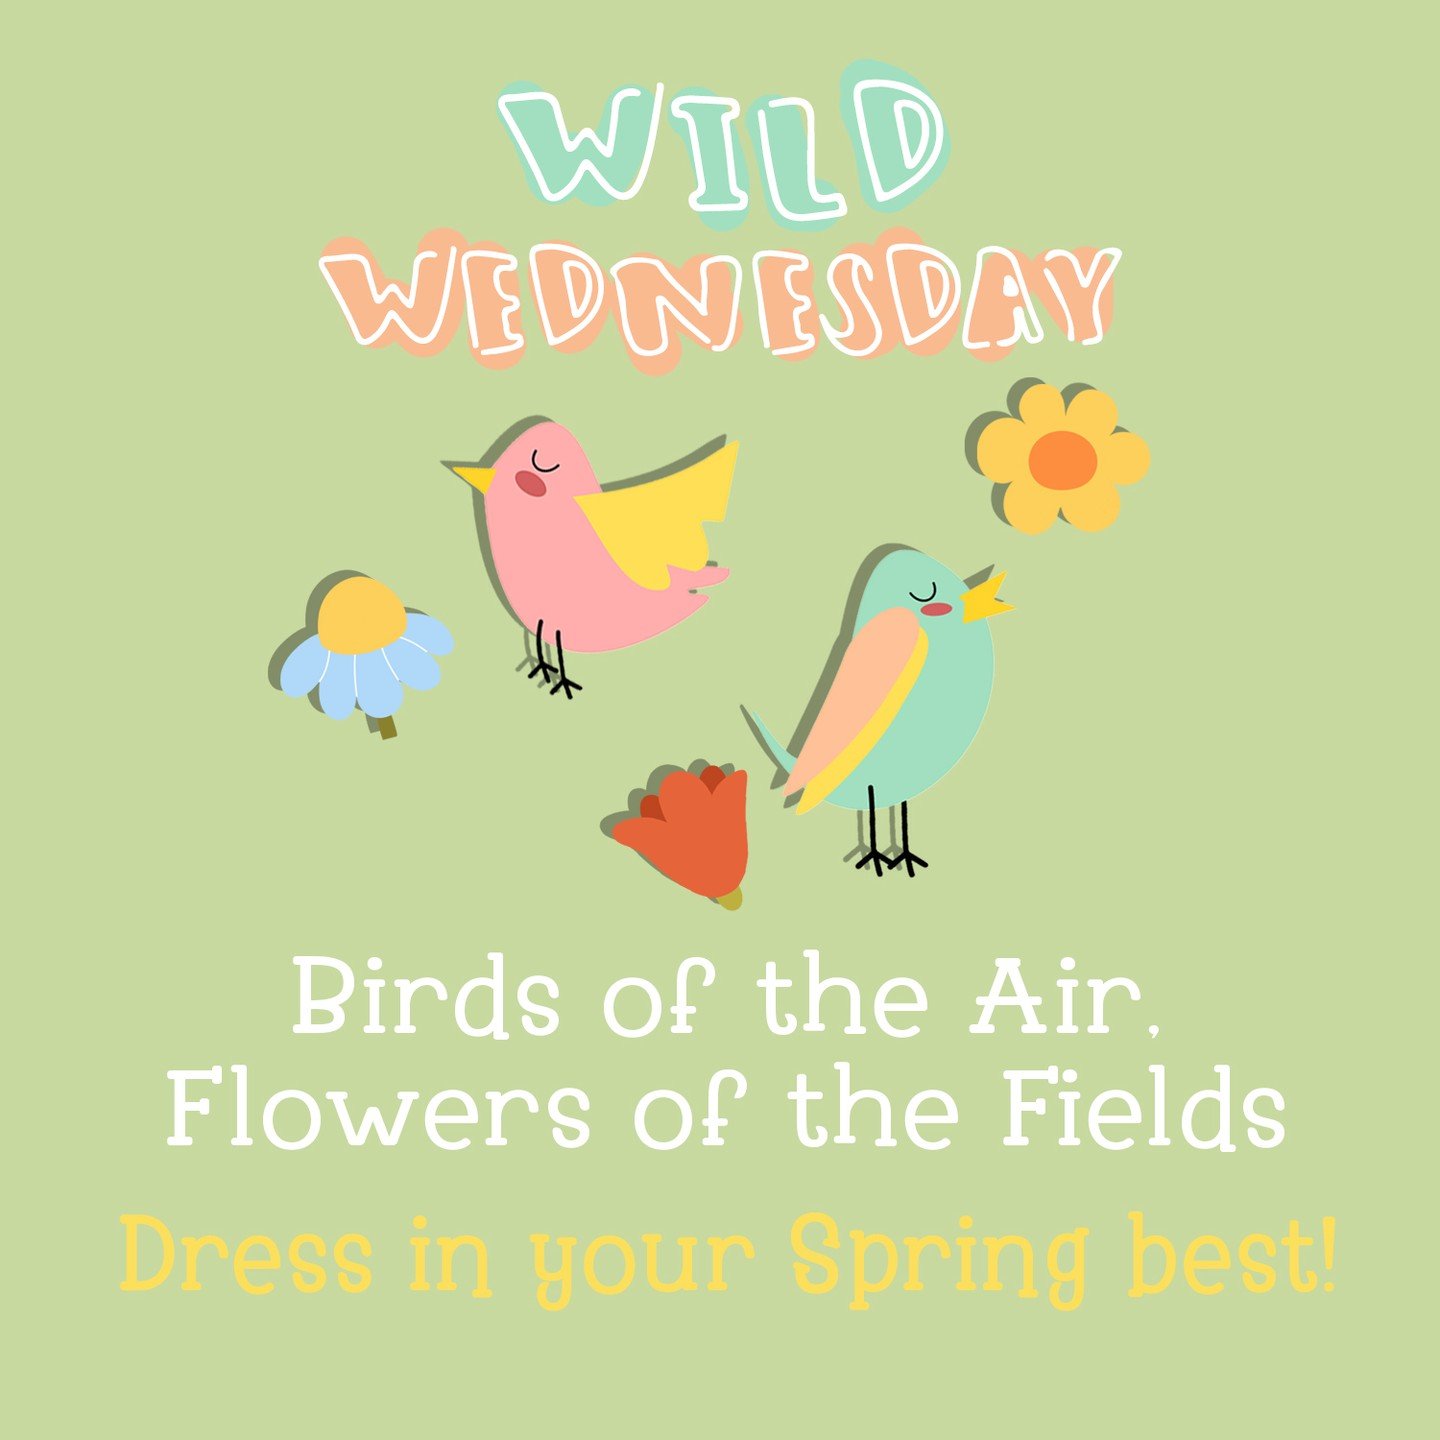 Wednesday, May 29th, is our next Wild Wednesday! We hope your students can join us for this fun-filled night of worship, reading the Word, and dressing up in their spring best!